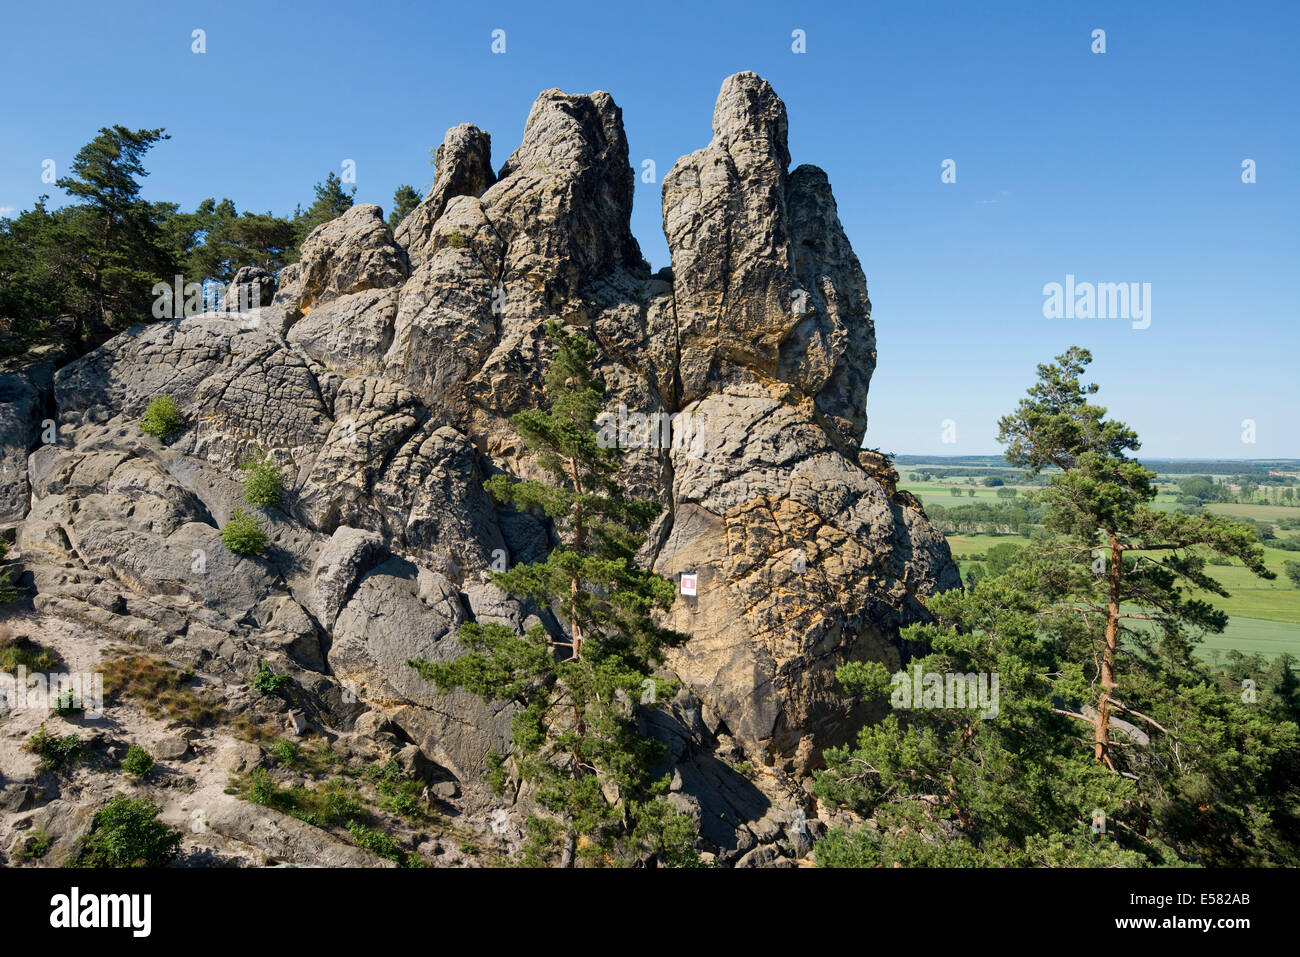 'Hamburger Wappen' sandstone formations, part of the Devil's Wall, Teufelsmauer, near Timmenrode, Harz, Saxony-Anhalt, Germany Stock Photo